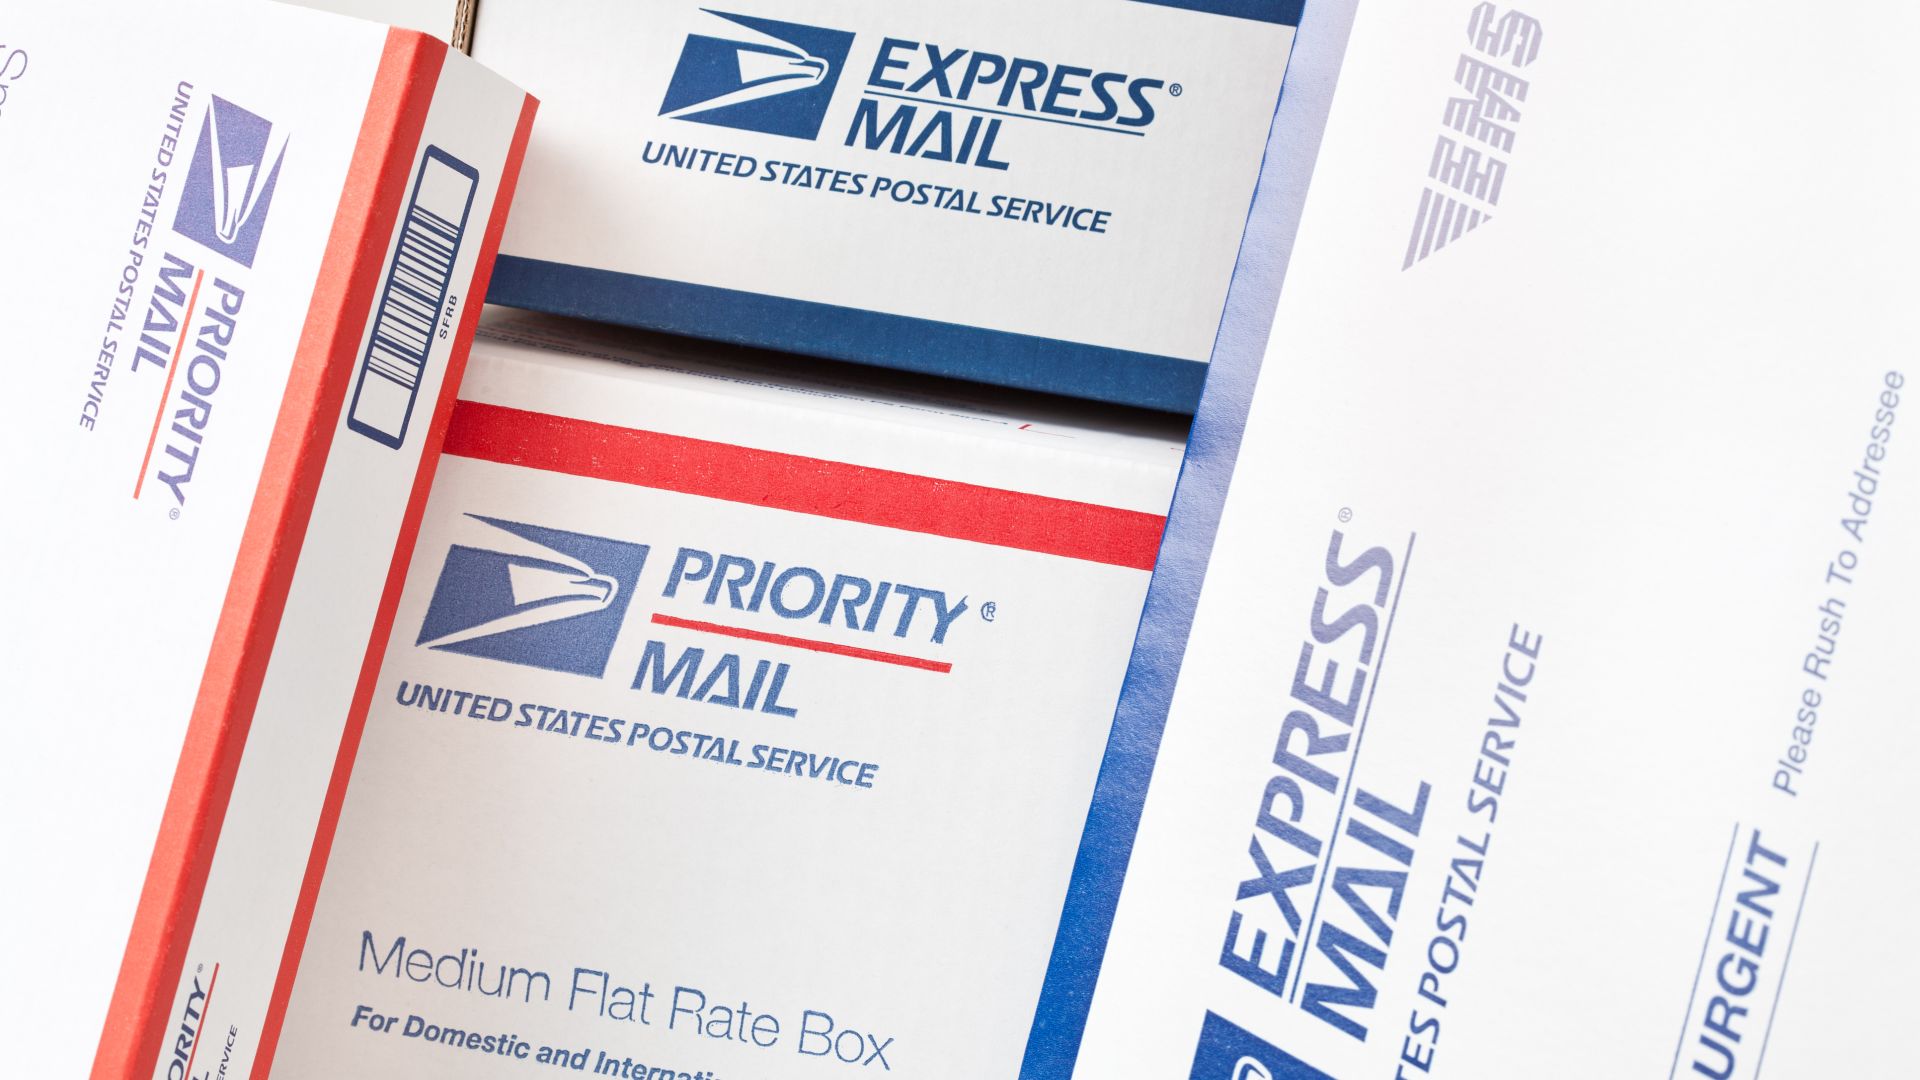 Christmas 2023 shipping deadlines: When to mail packages, cards